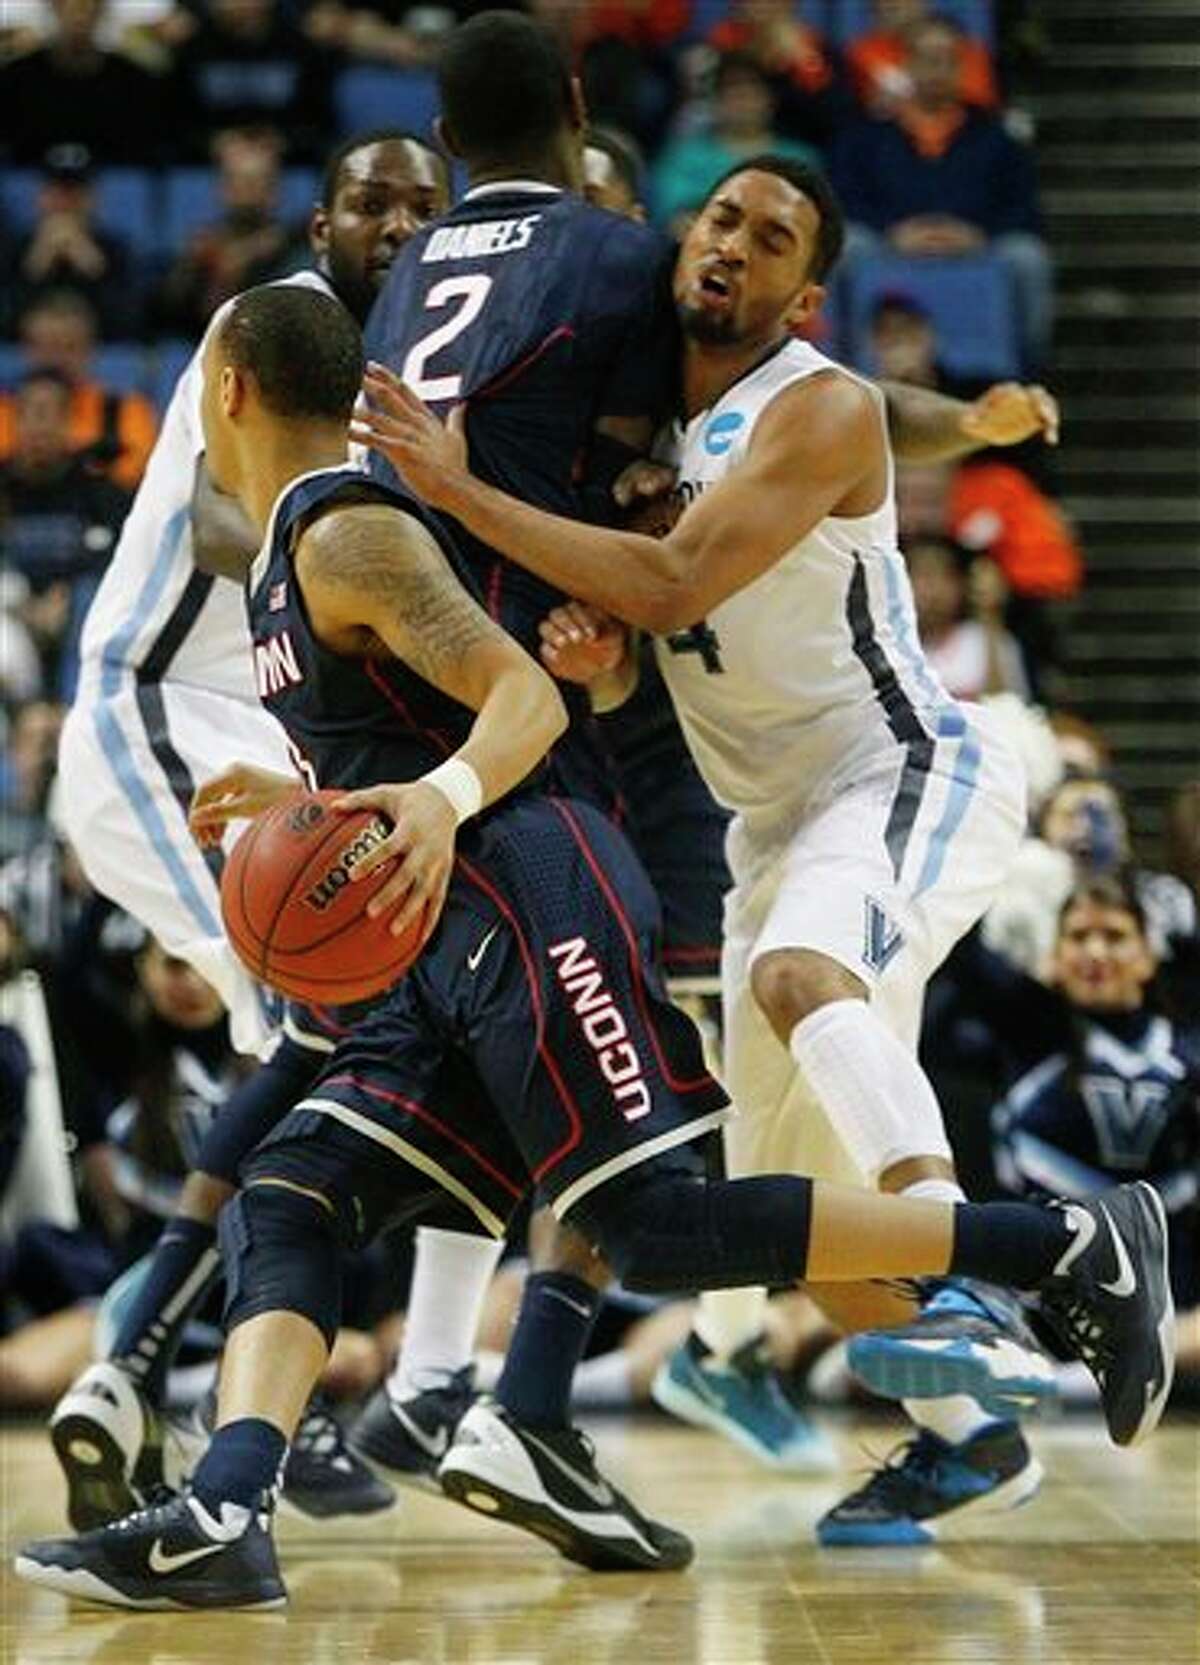 Villanova's Darrun Hilliard II (4) runs into a pick set by Connecticut's DeAndre Daniels (2) as he chases Shabazz Napier during the first half of a third-round game in the NCAA men's college basketball tournament in Buffalo, N.Y., Saturday, March 22, 2014. (AP Photo/Bill Wippert)